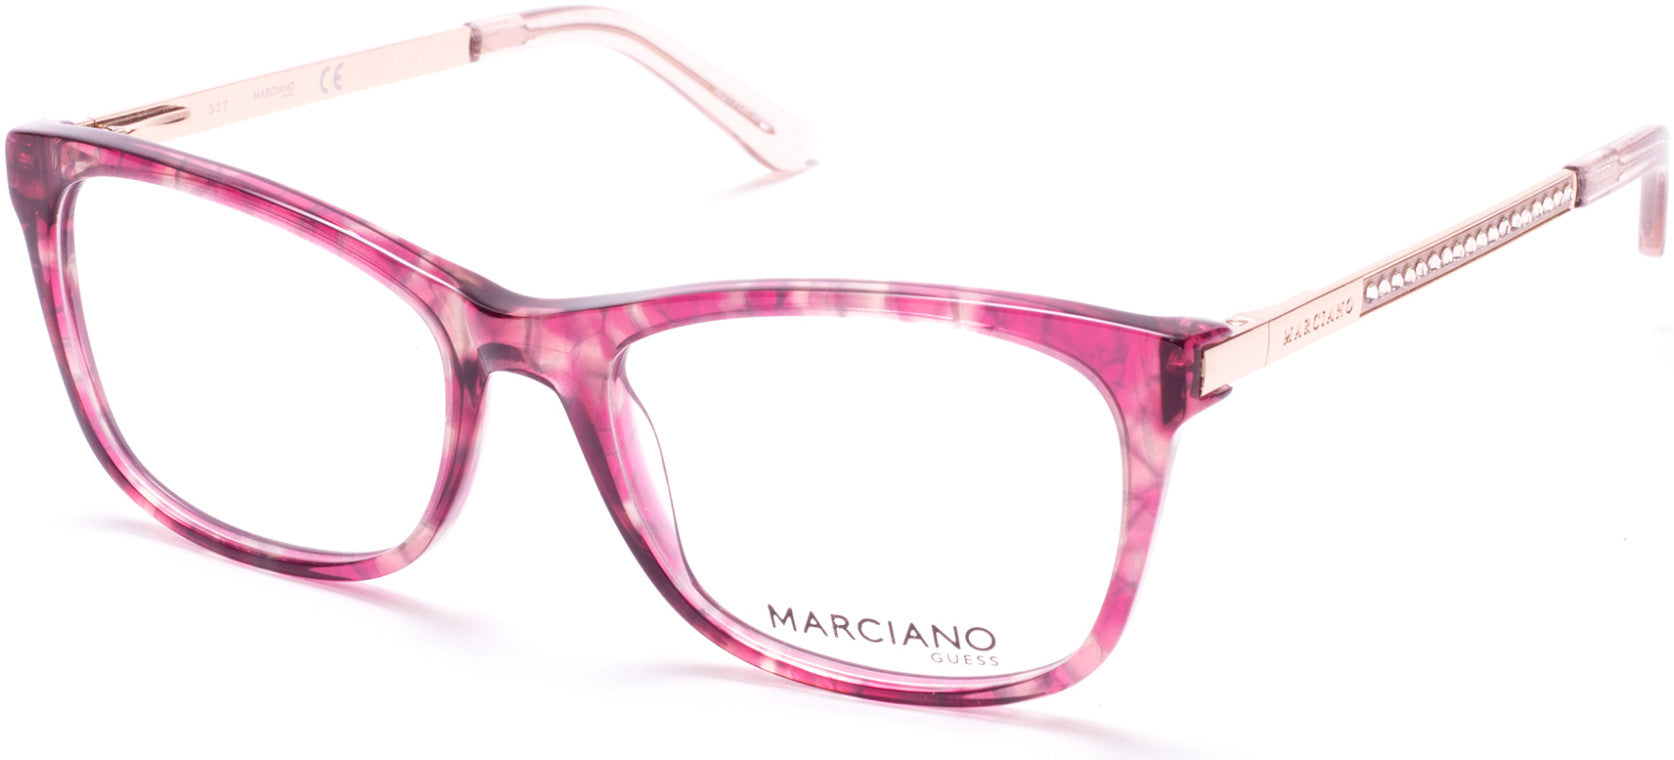 Guess By Marciano GM0324 Geometric Eyeglasses 074-074 - Pink 